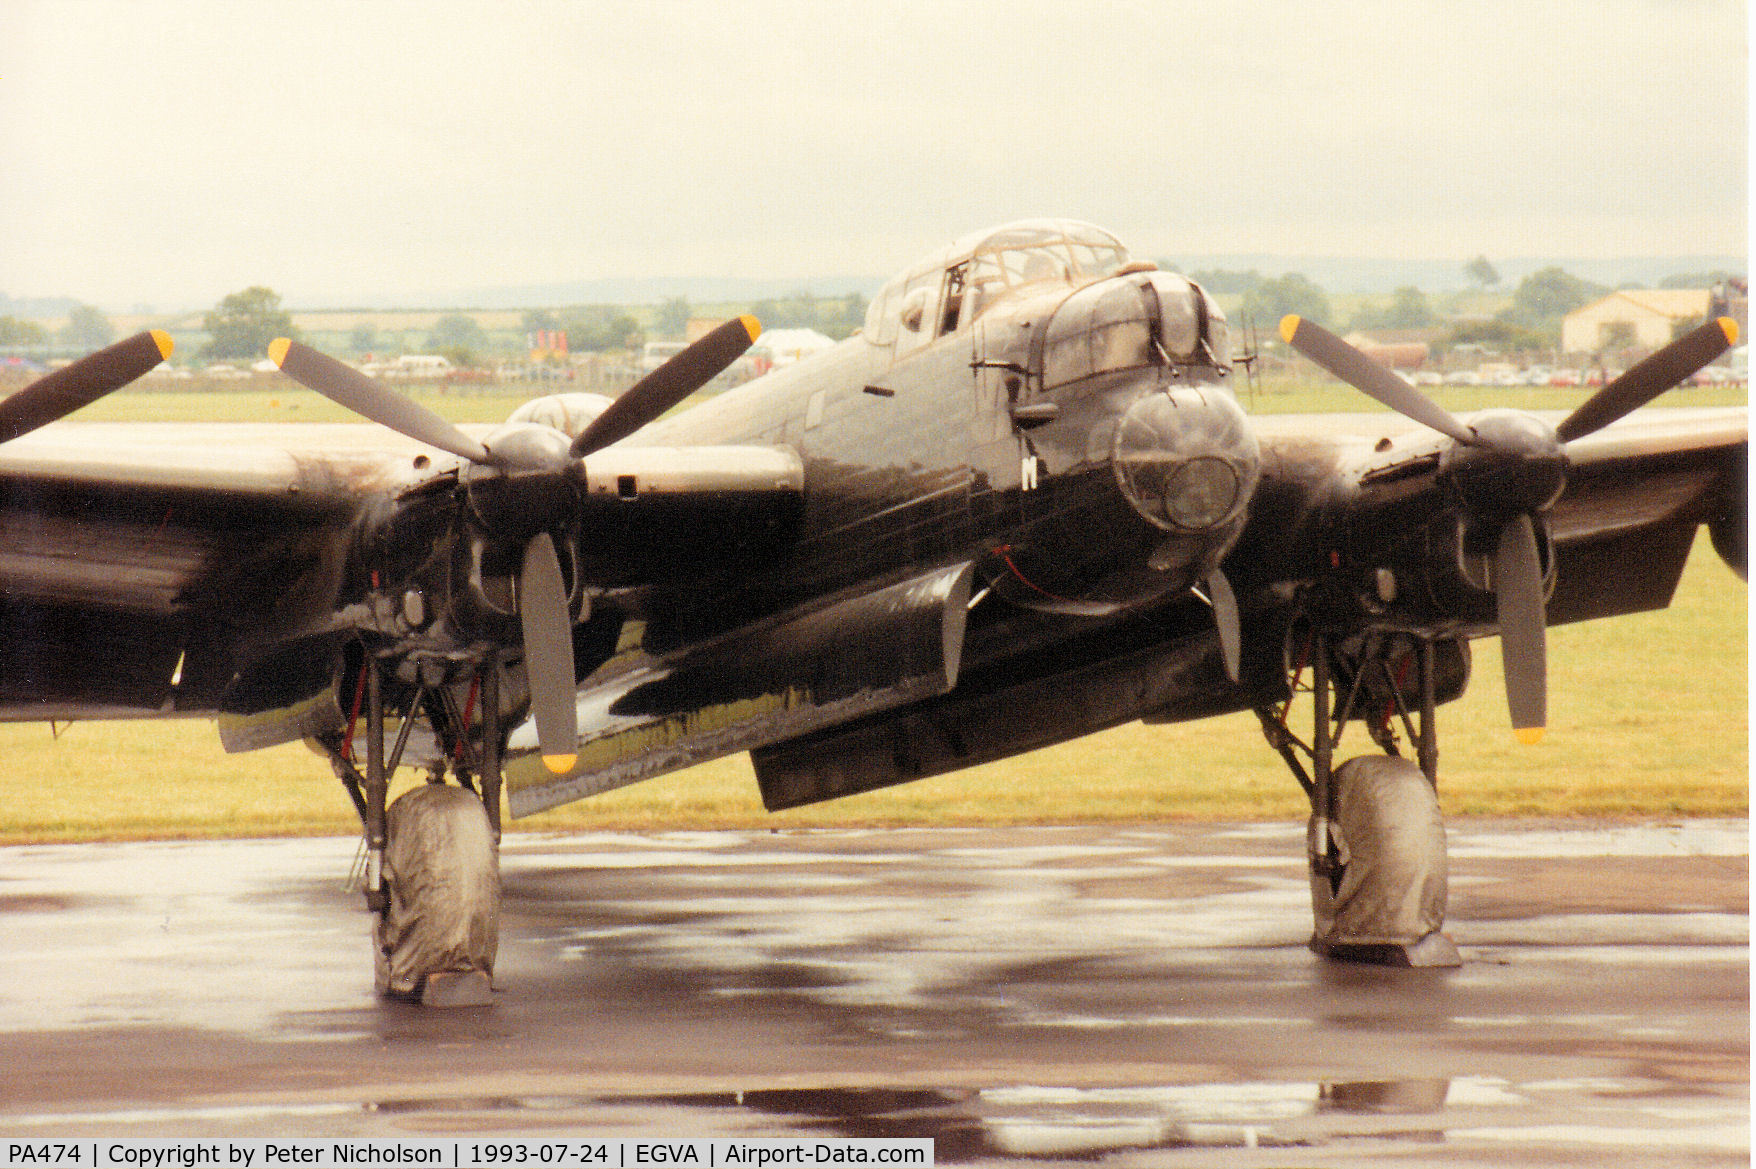 PA474, 1945 Avro 683 Lancaster B1 C/N VACH0052/D2973, Lancaster B.1 of the RAF Battle of Britain Memorial Flight based at RAF Coningsby on the flight-line at the 1993 Intnl Air Tattoo at RAF Fairford.